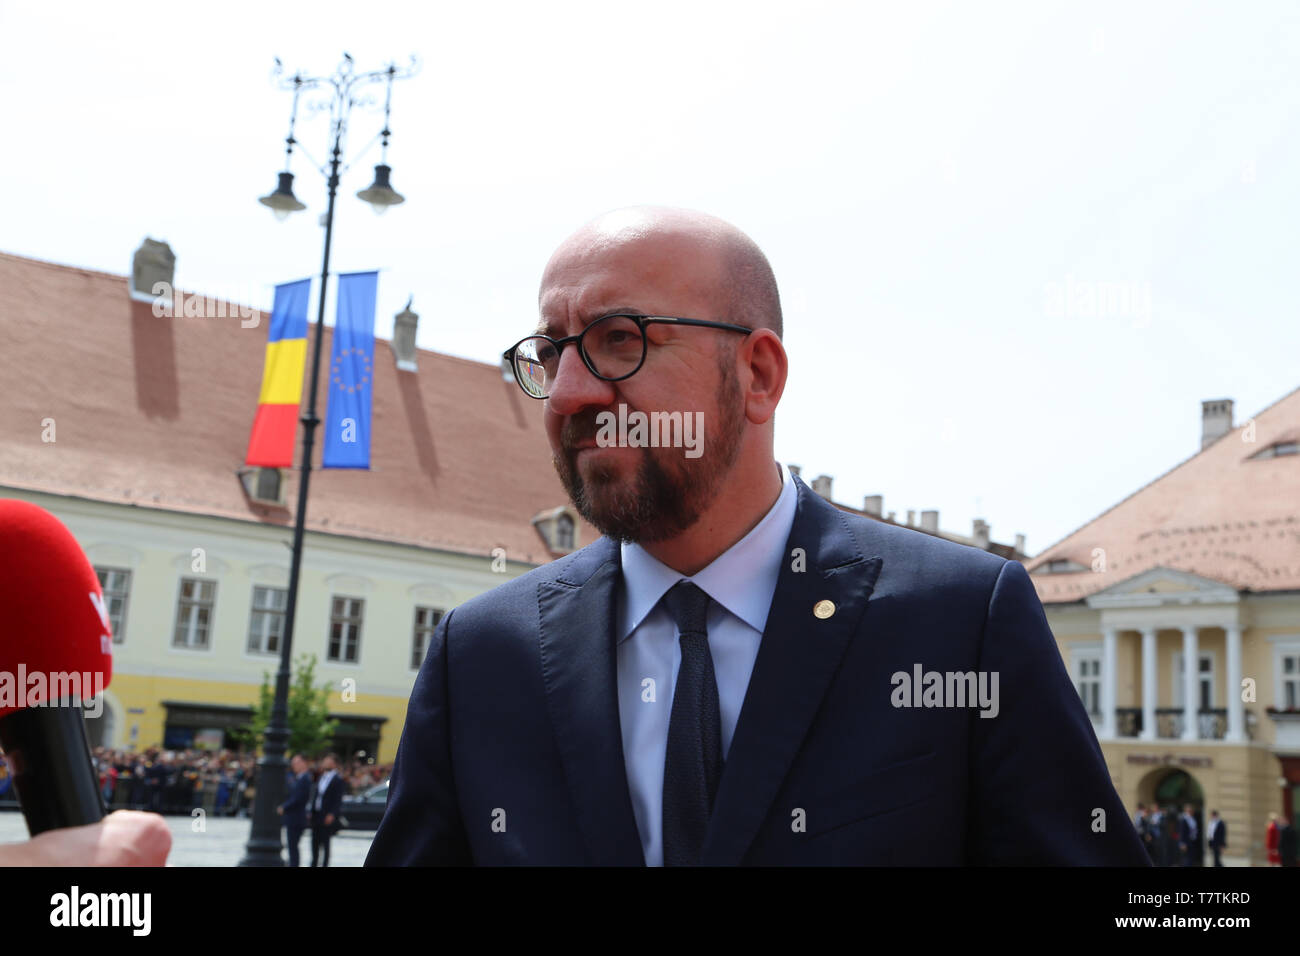 Sibiu, Romania. 9th May, 2019. Belgian Prime Minister Charles Michel arrives in the Grand Square in front of the Sibiu City Hall to attend the European Union (EU) informal summit in Sibiu, Romania, May 9, 2019. The leaders of the EU member states on Thursday agreed on defending 'one Europe' and upholding the rules-based international order in their '10 commitments' declaration, made at an informal summit in Sibiu. Credit: Chen Jin/Xinhua/Alamy Live News Stock Photo